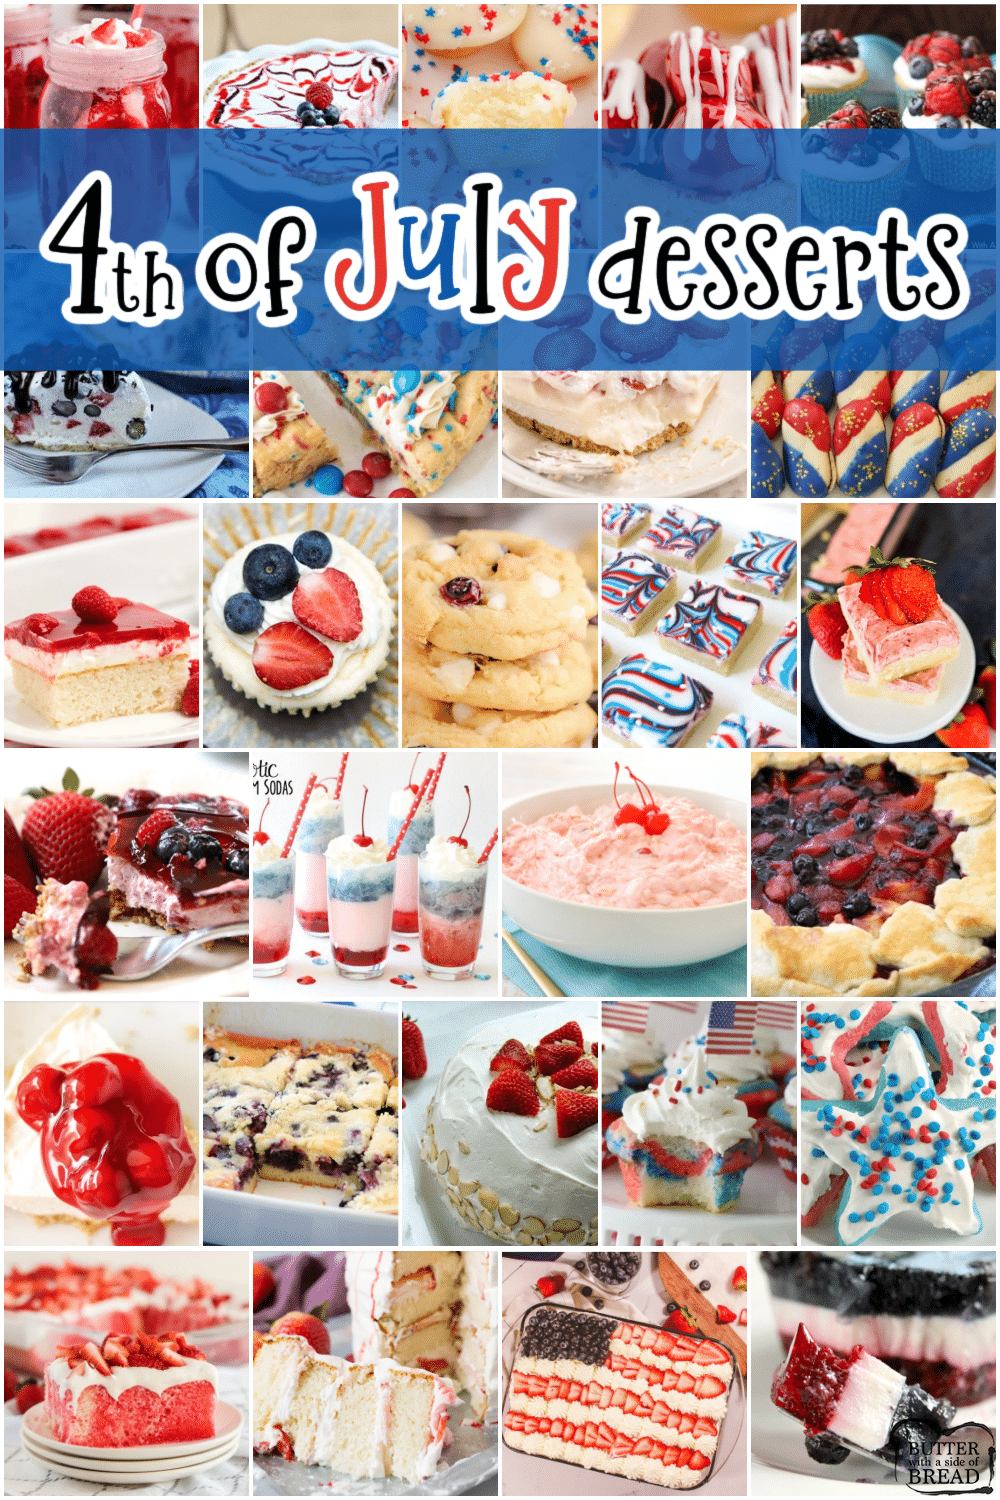 4th of July Dessert recipes that are sweet, festive and perfectly patriotic! Easy red, white & blue recipes that come together fast and everyone loves!